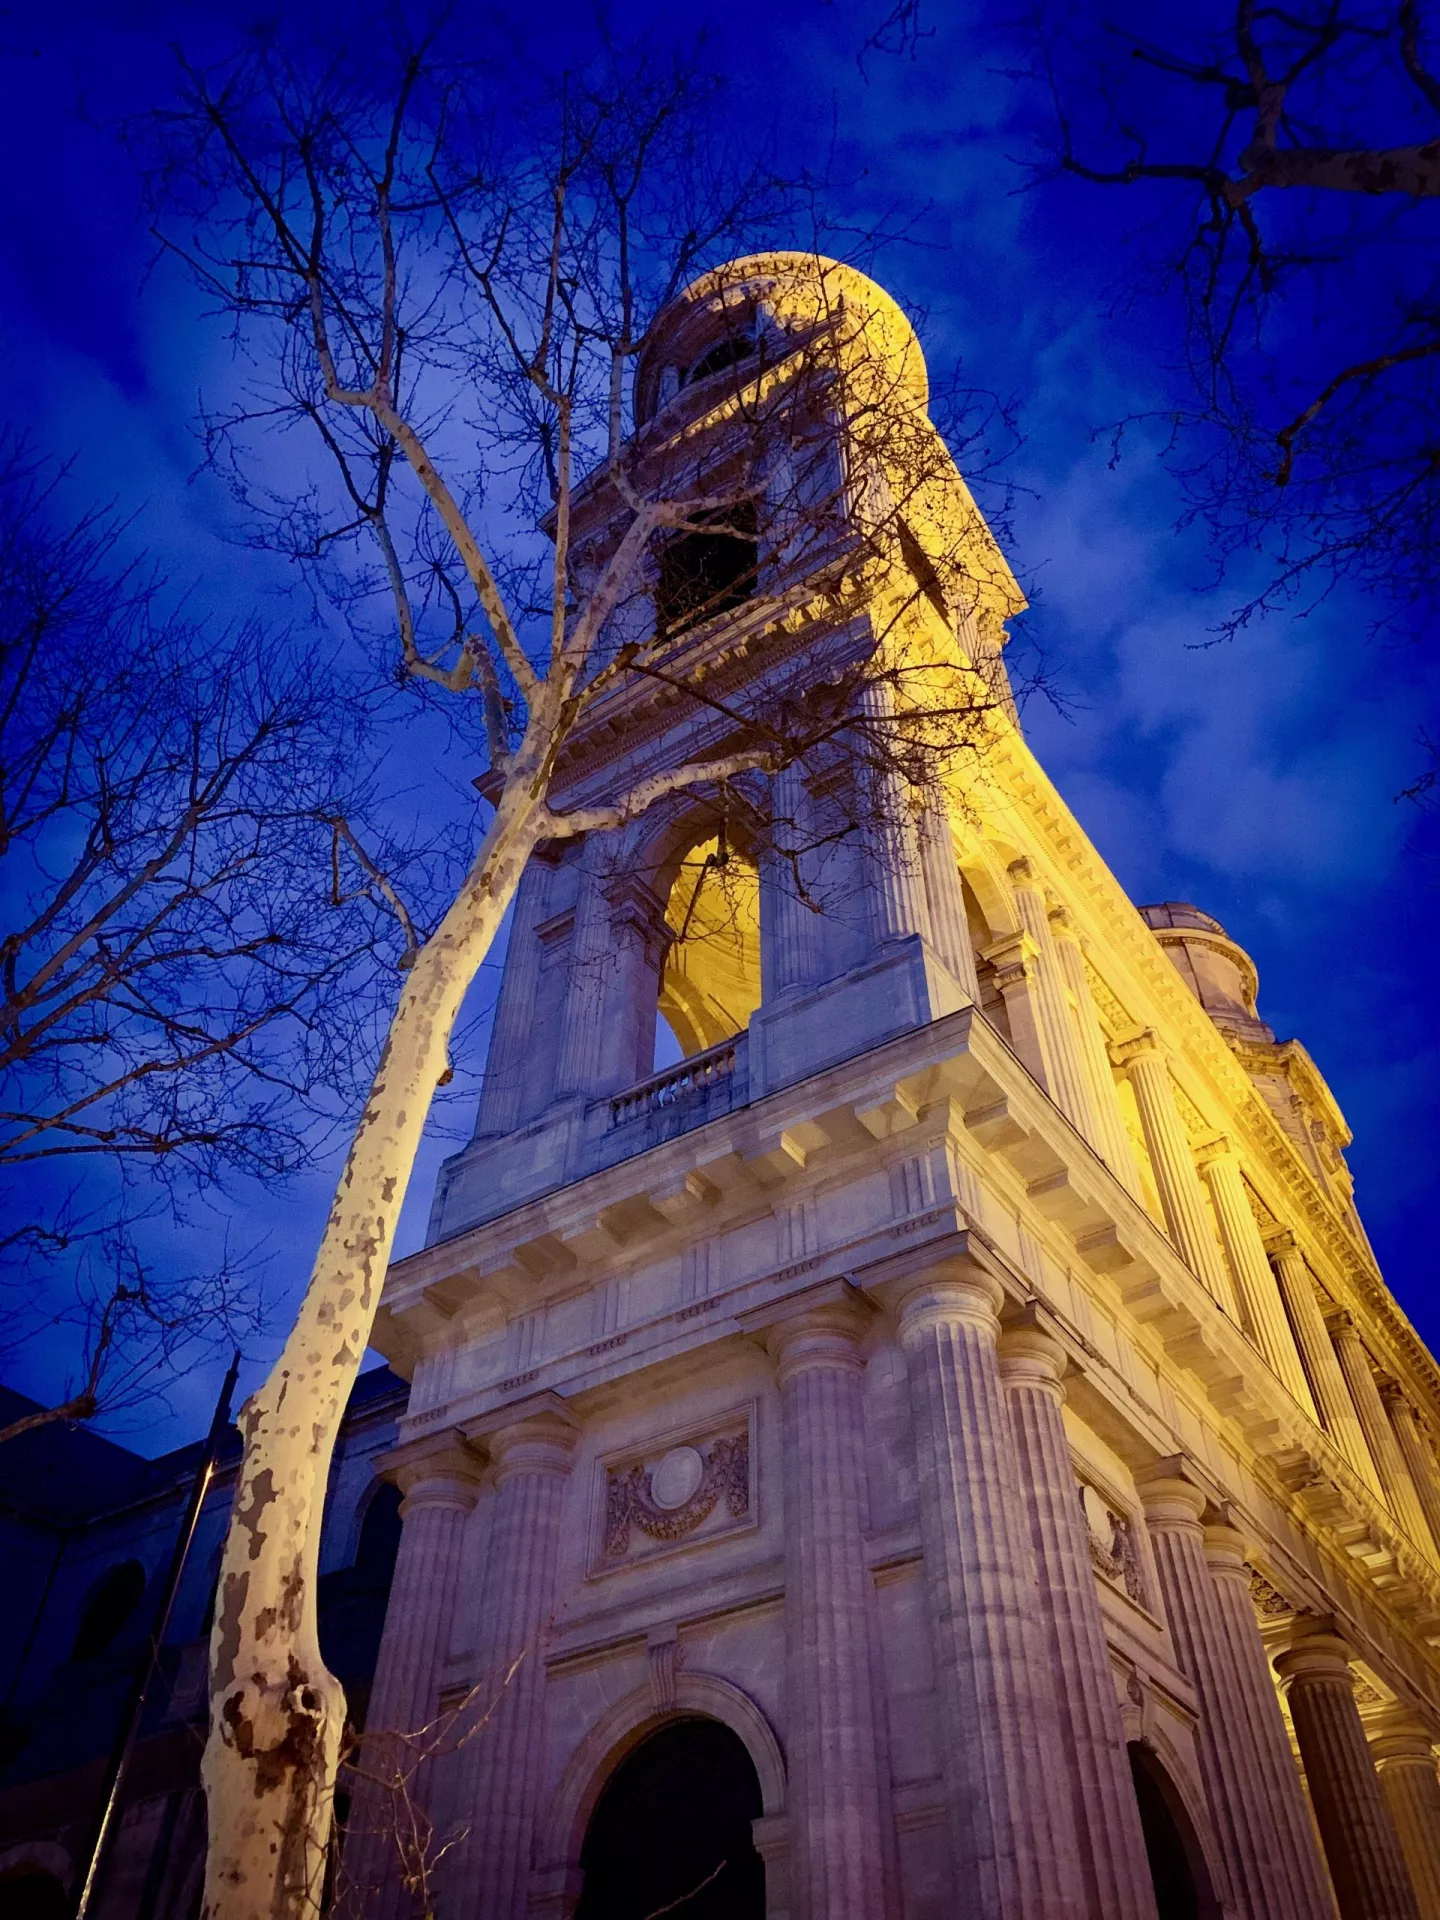 Looking up to a white marble cupola tower glowing yellow from artificial lighting from below, framed by a darkening evening sky with wispy clouds, which catch the last streams of sunlight. Limbs from winter barren trees subtly block the view.